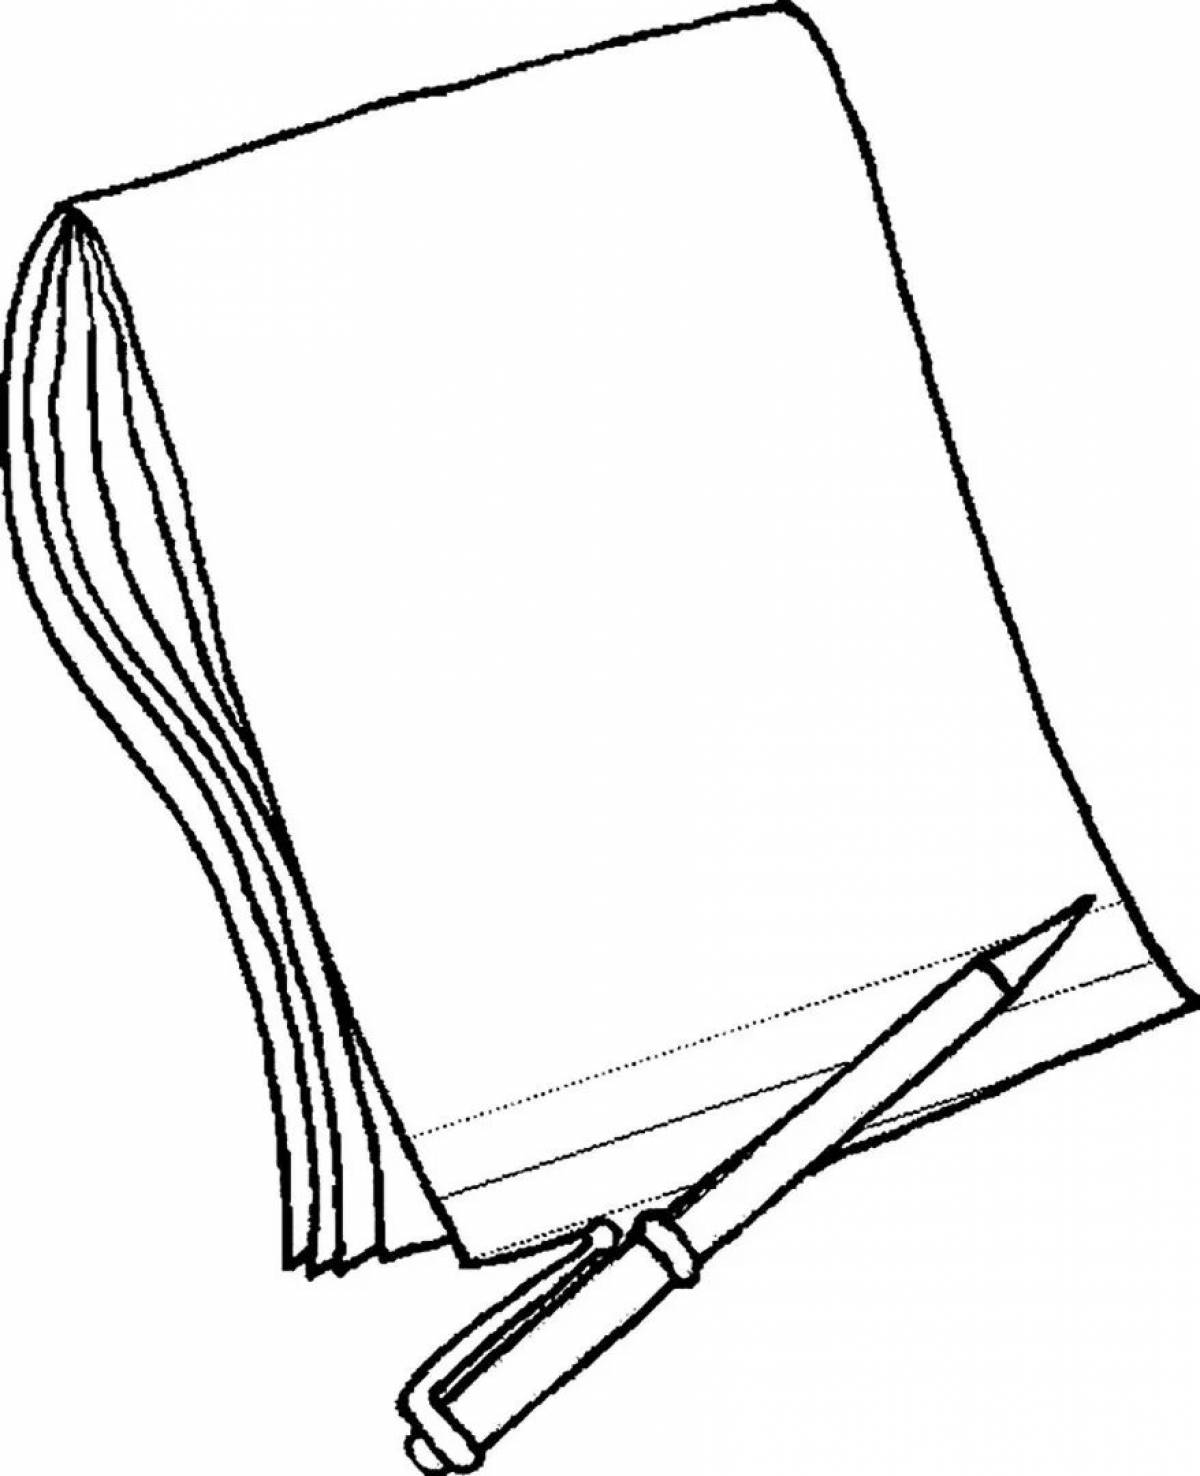 Attractive blank coloring sheet